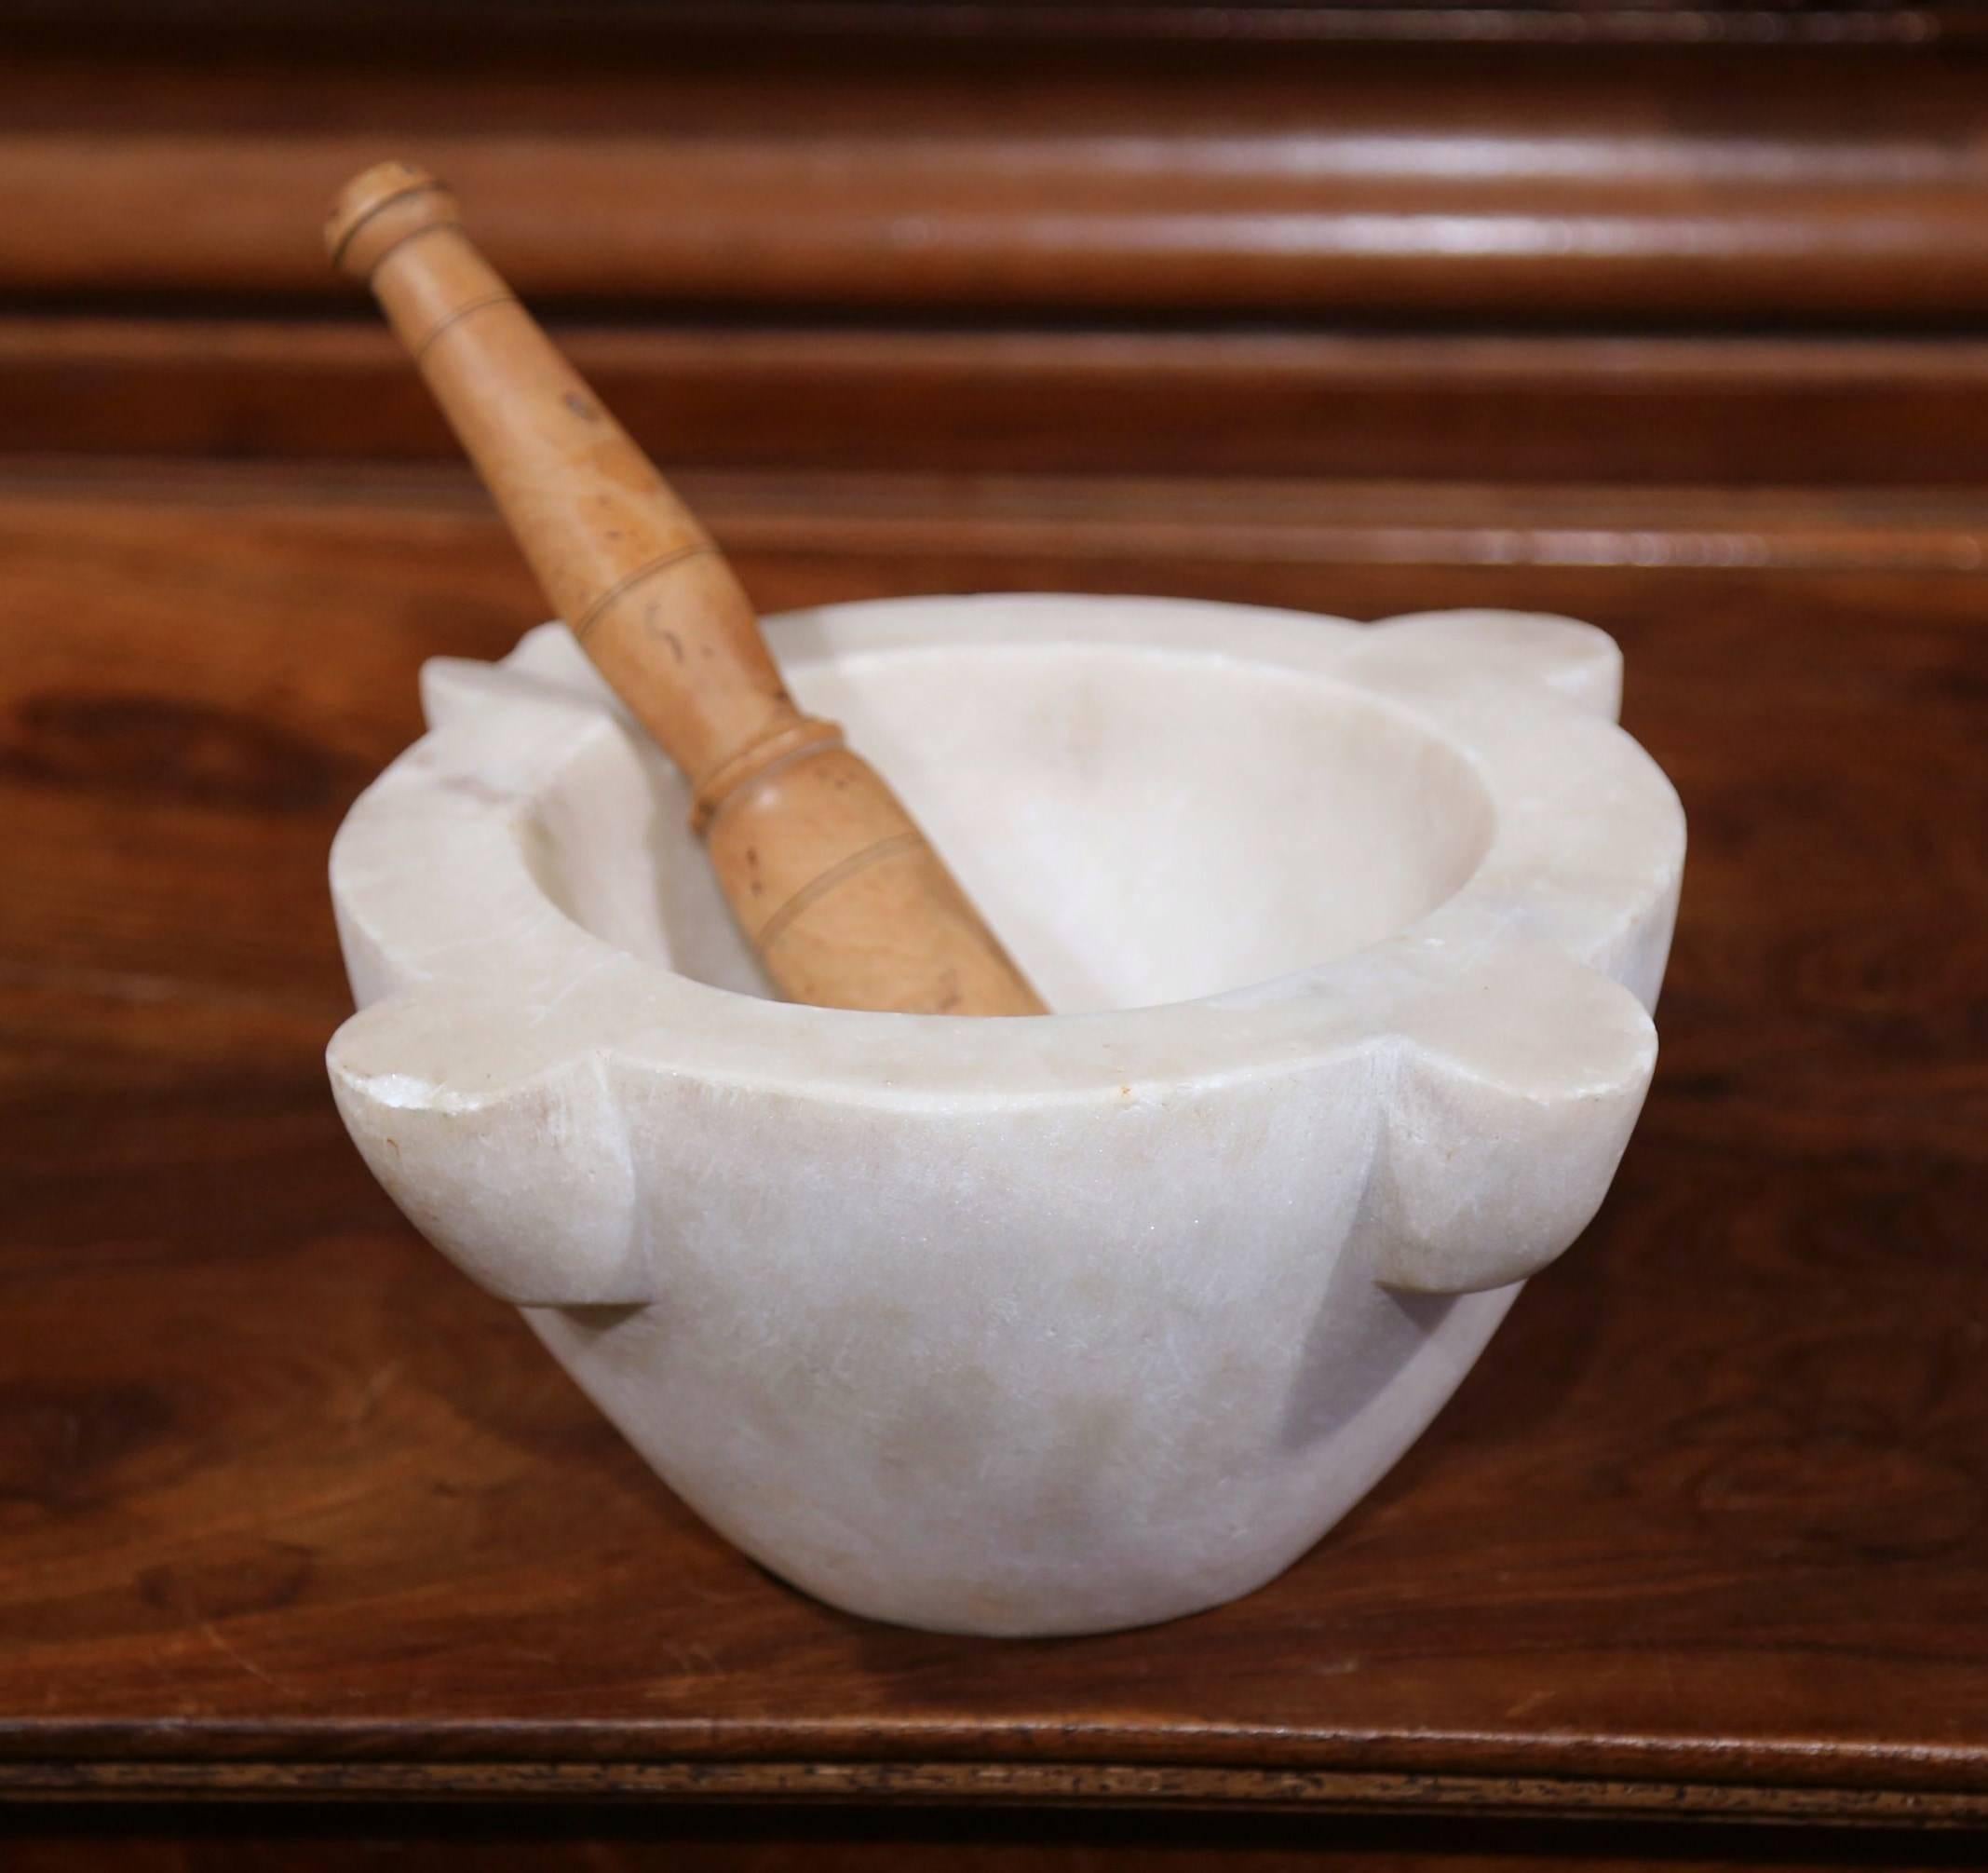 Grind spices in your kitchen with this beautifully carved, antique white marble mortar from France, circa 1860. Round in shape, the set has its original turned walnut pestle. Excellent condition with rich patina.
Measures: 12”diameter x 5.5” height.